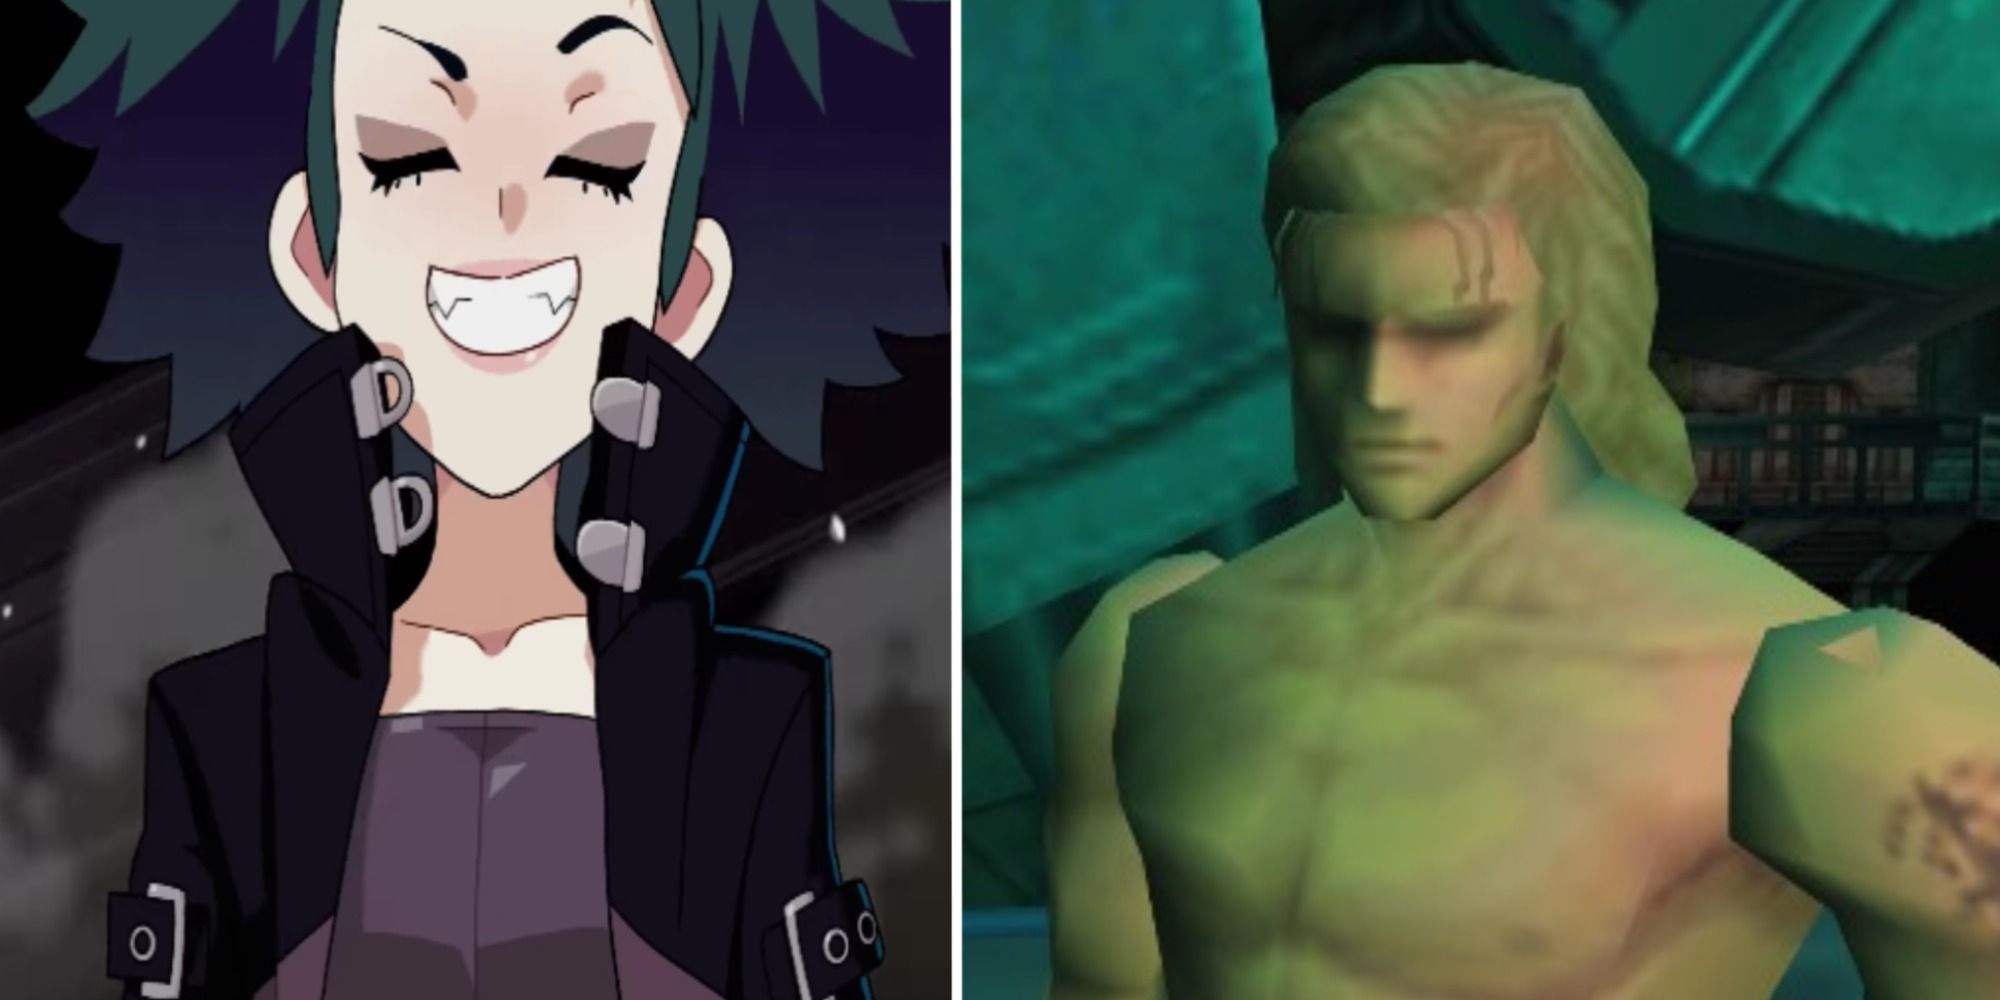 Split image Advance Wars 1+2 Re-Boot Camp Lash smiling and Metal Gear Solid Liquid Snake stands before Metal Gear Rex